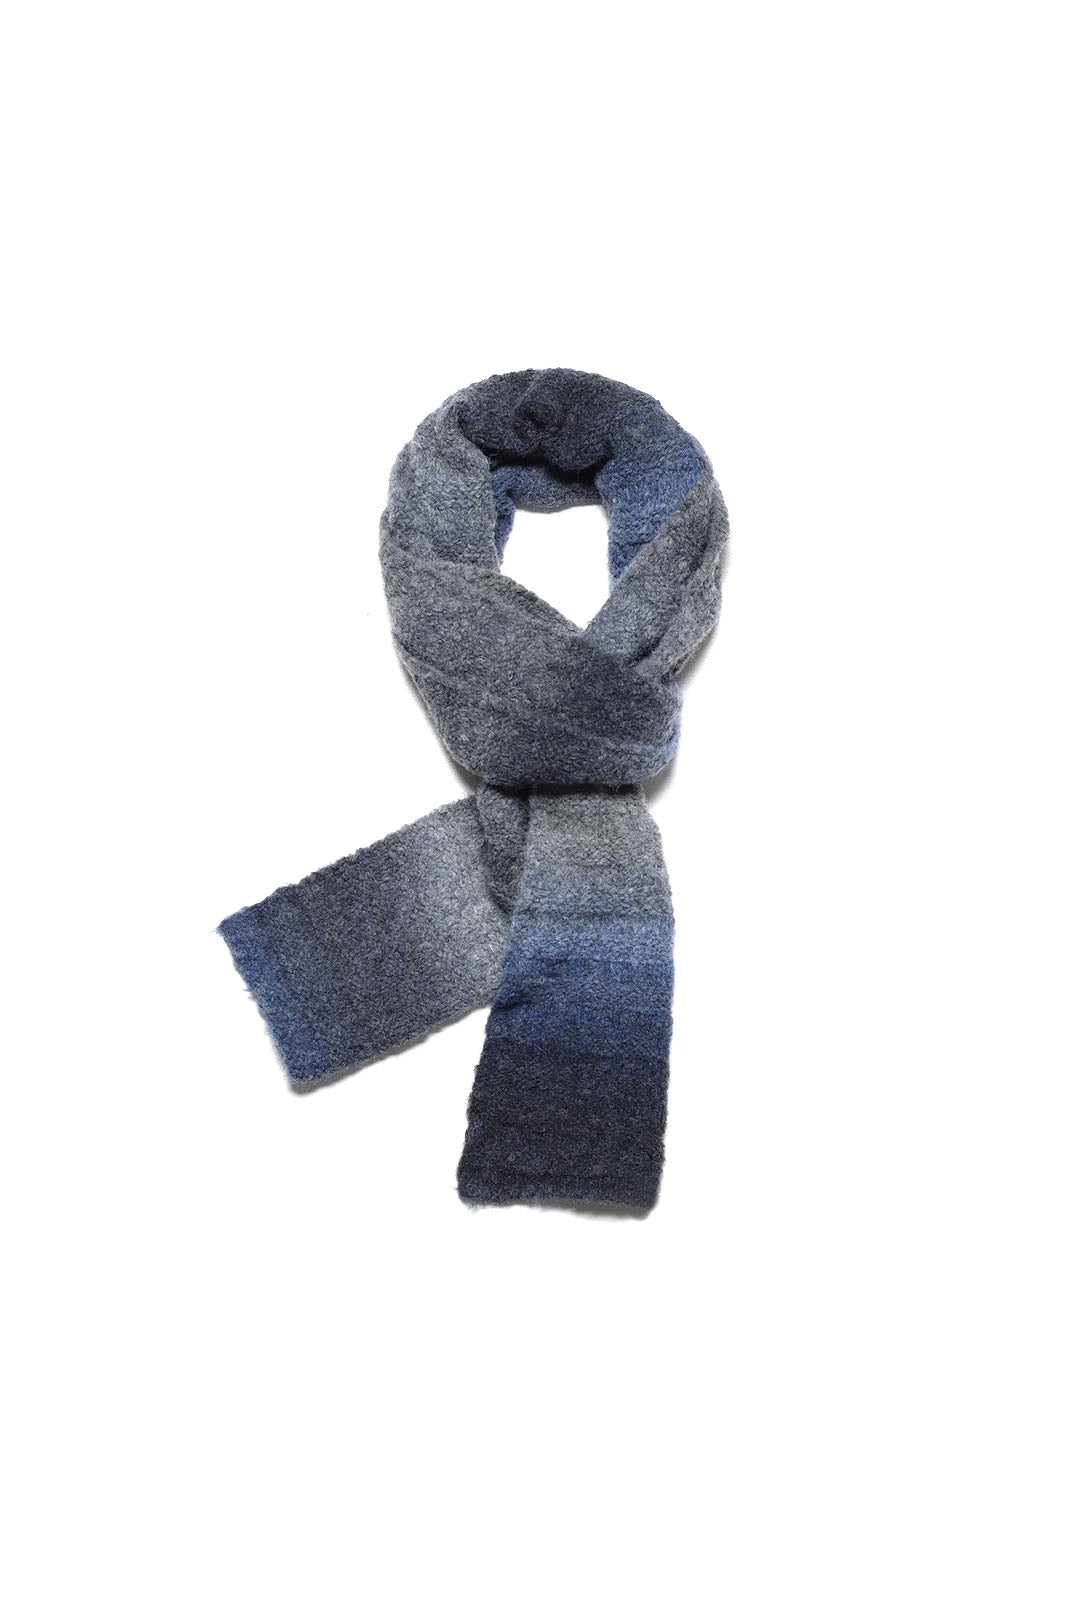 Black, navy, and grey knit scarf